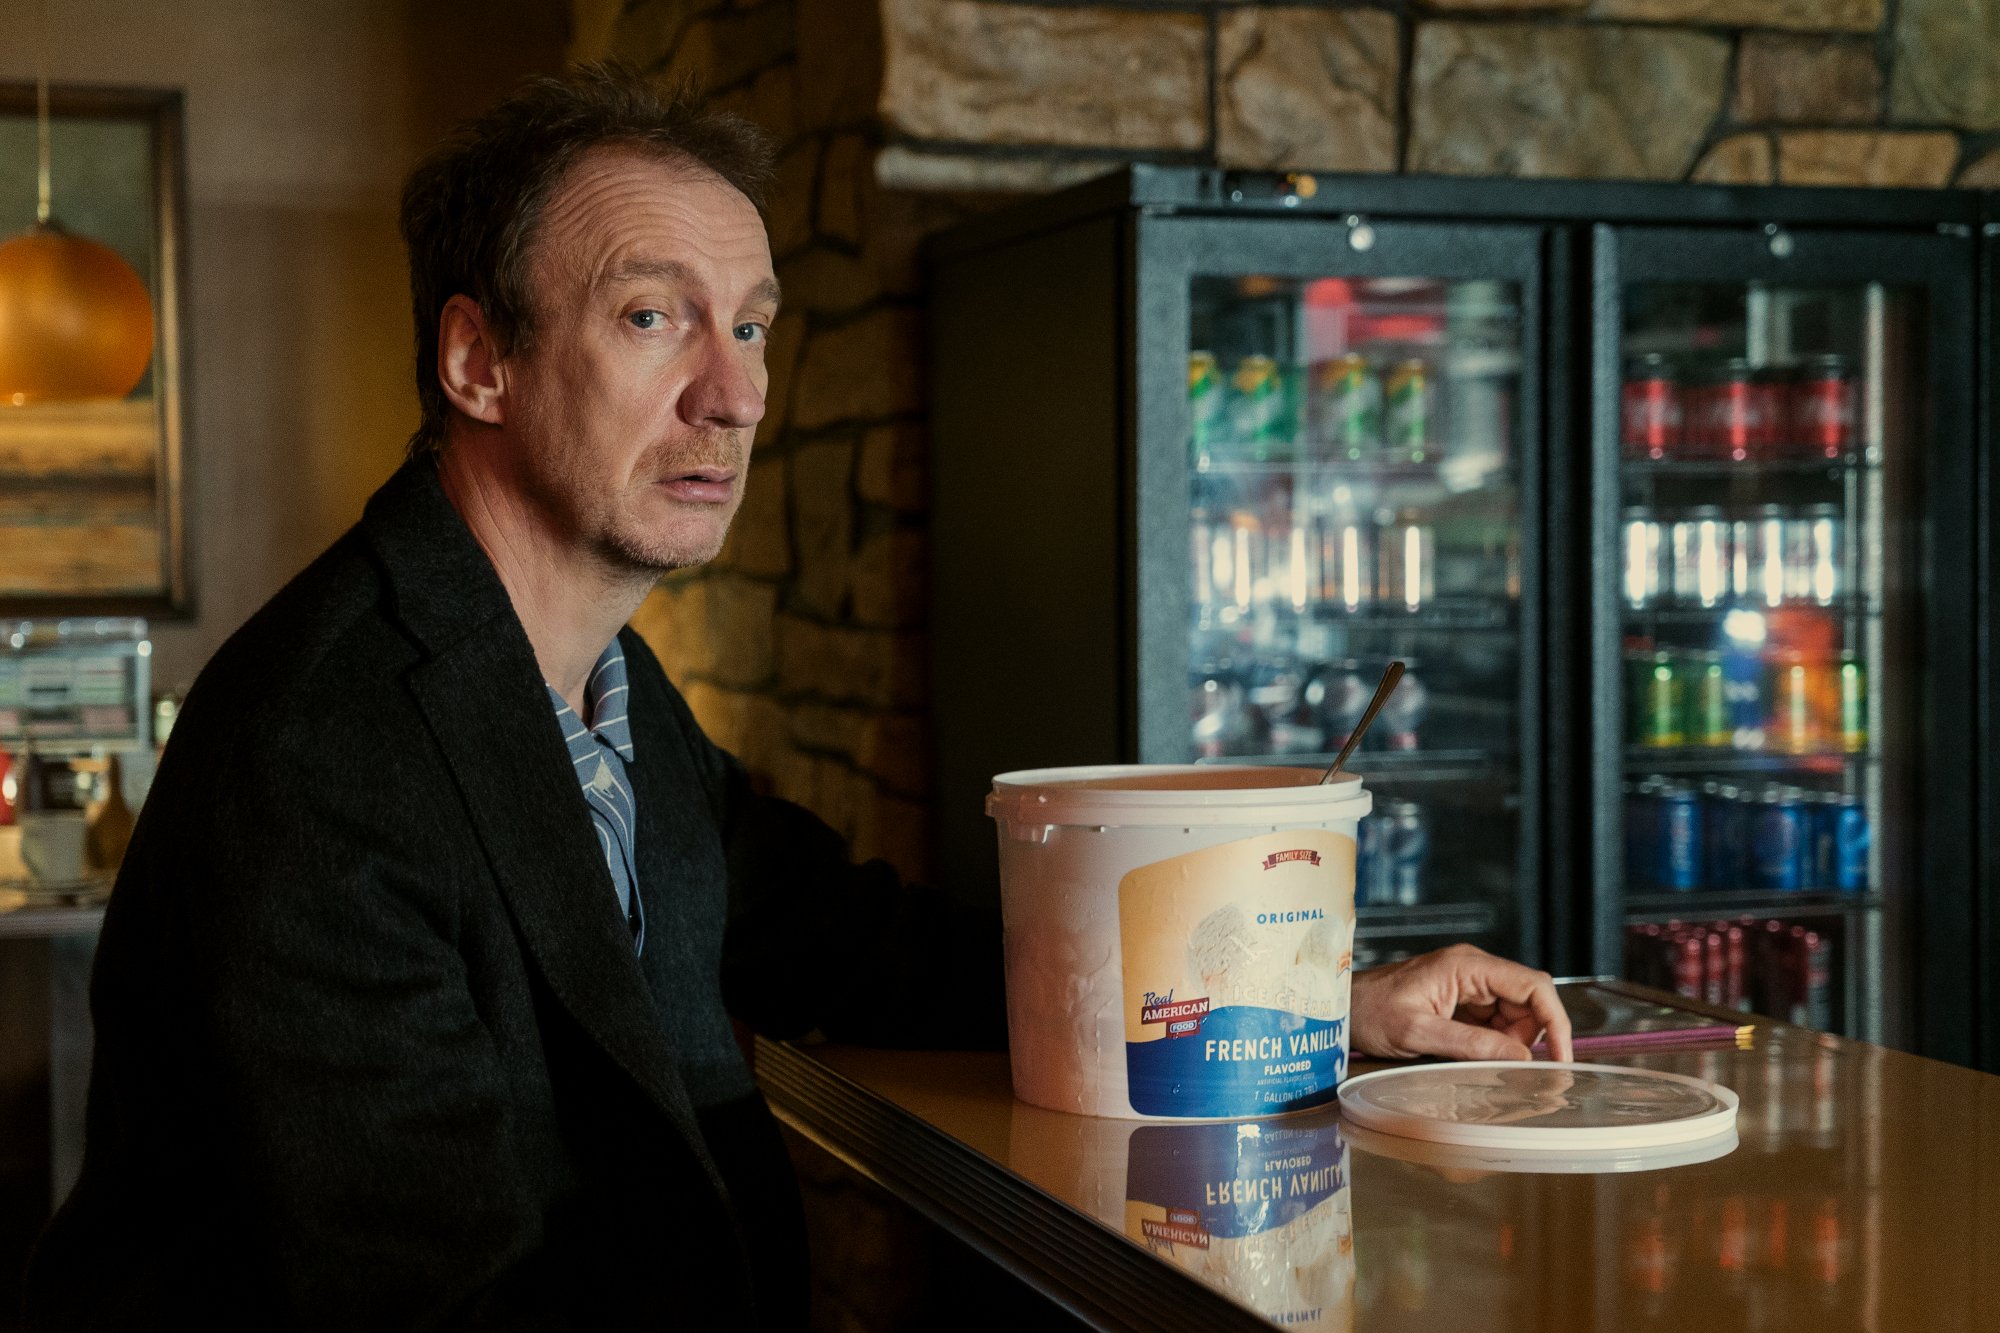 Actor David Thewlis in 'The Sandman' on Netflix. He's sitting at a counter and has a tub of ice cream in front of him.